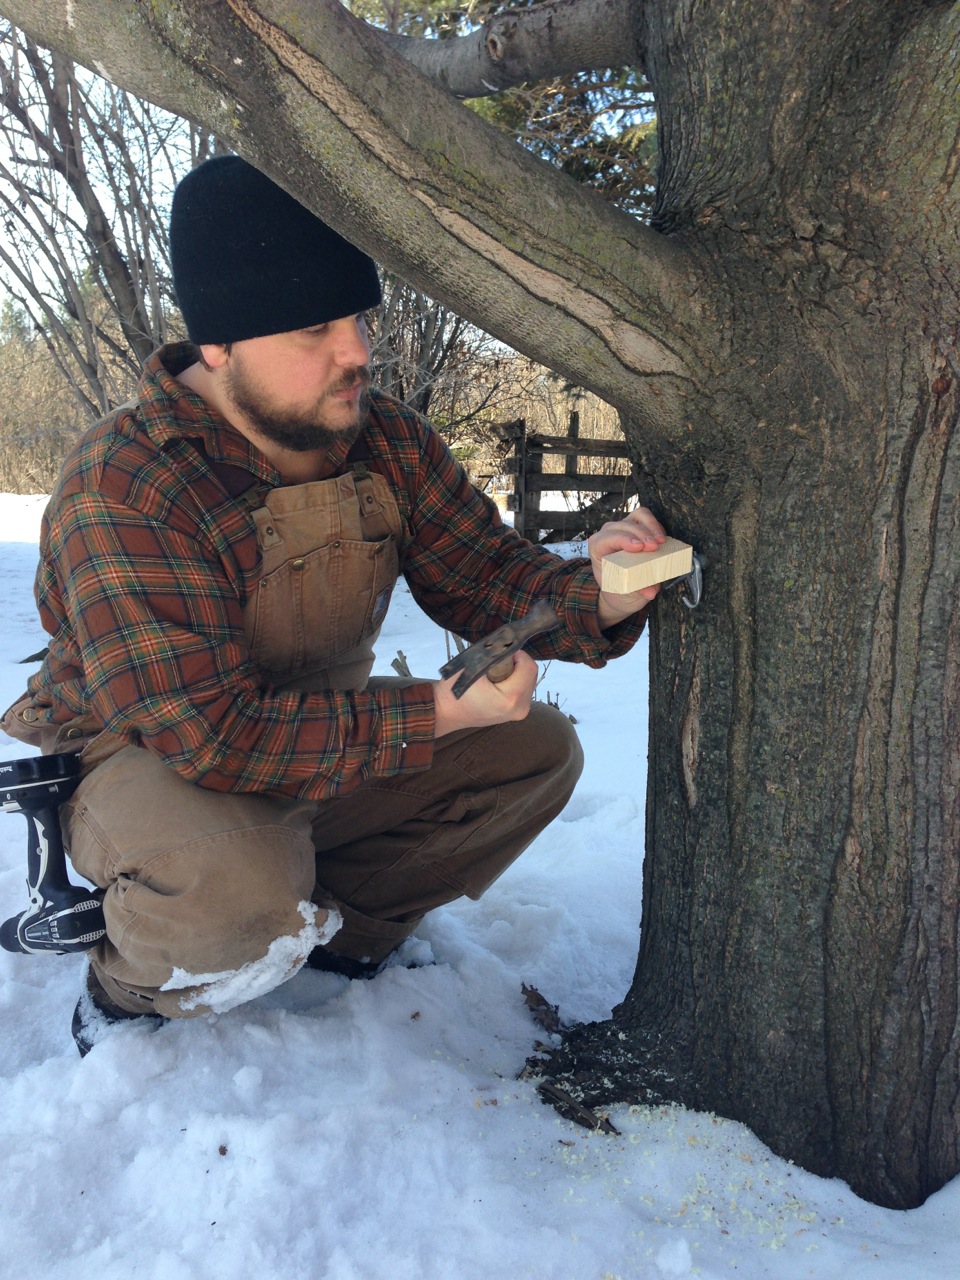 Boiling maple syrup over an open fire: Small Batch Maple Syrup-Making: You Only Need 1 Tree! How to make maple syrup at home without sugar maples. Whole-Fed Homestead